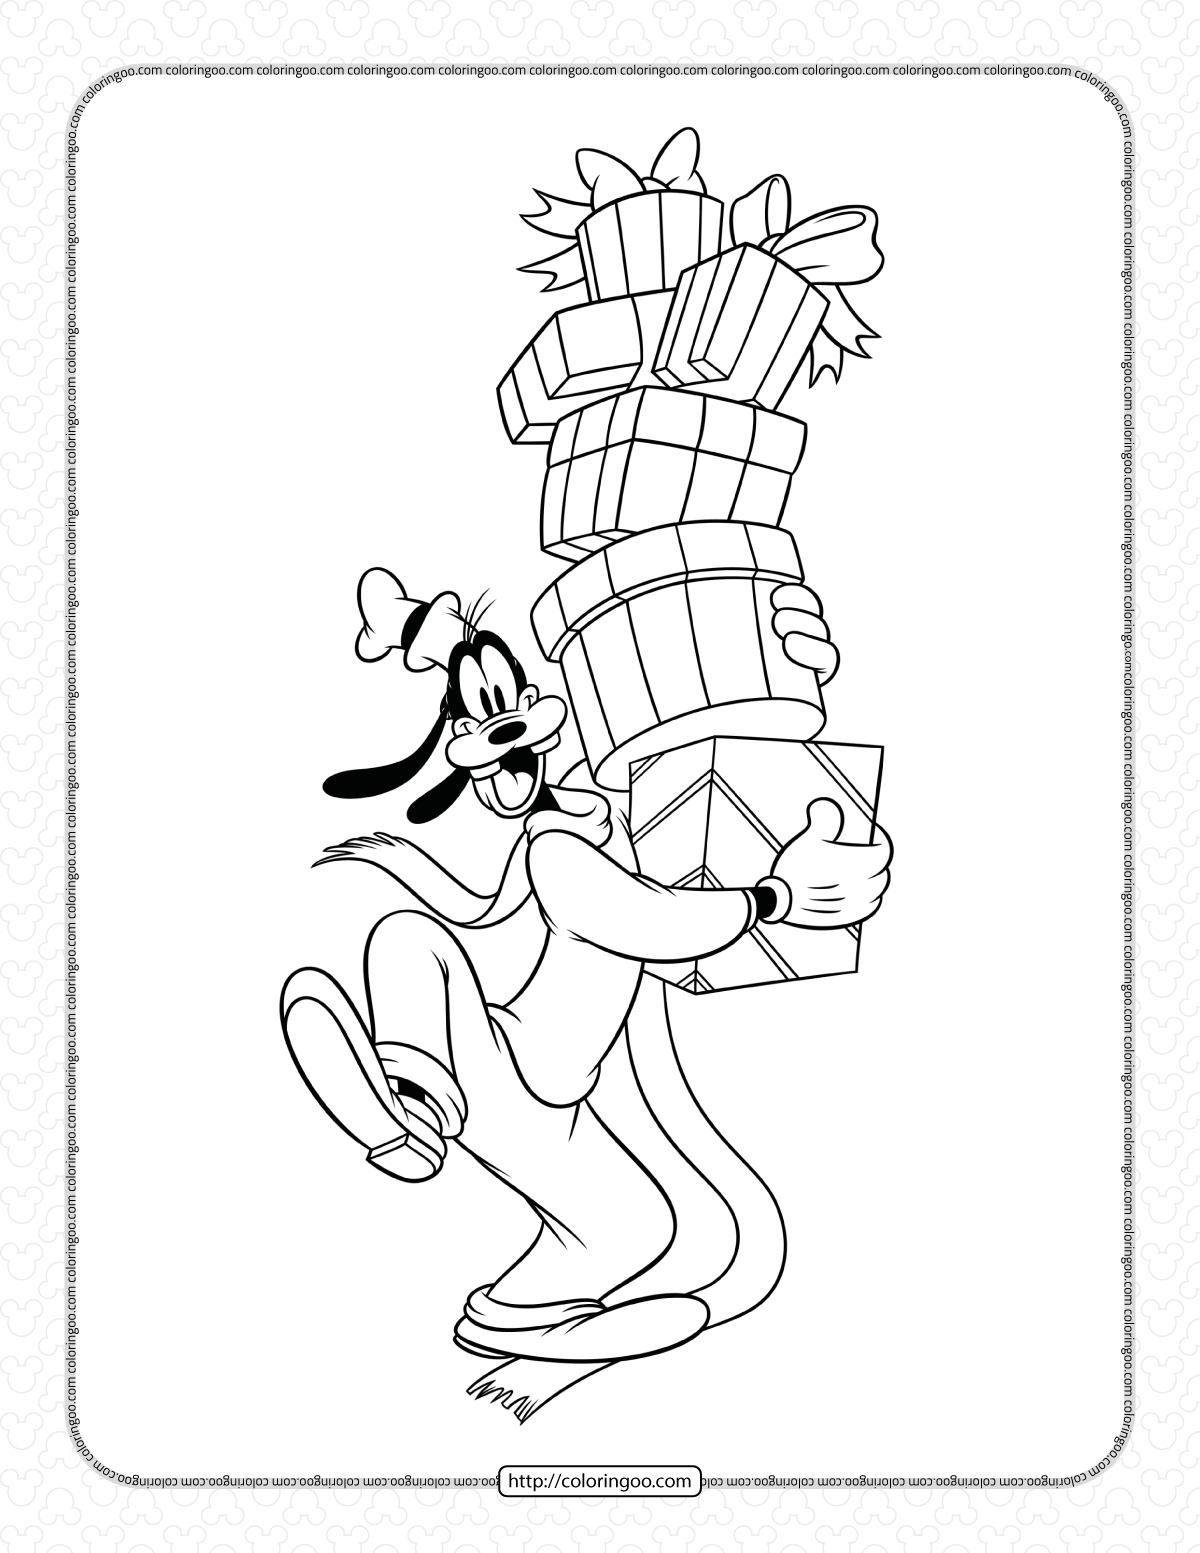 disney goofy carrying gifts coloring page